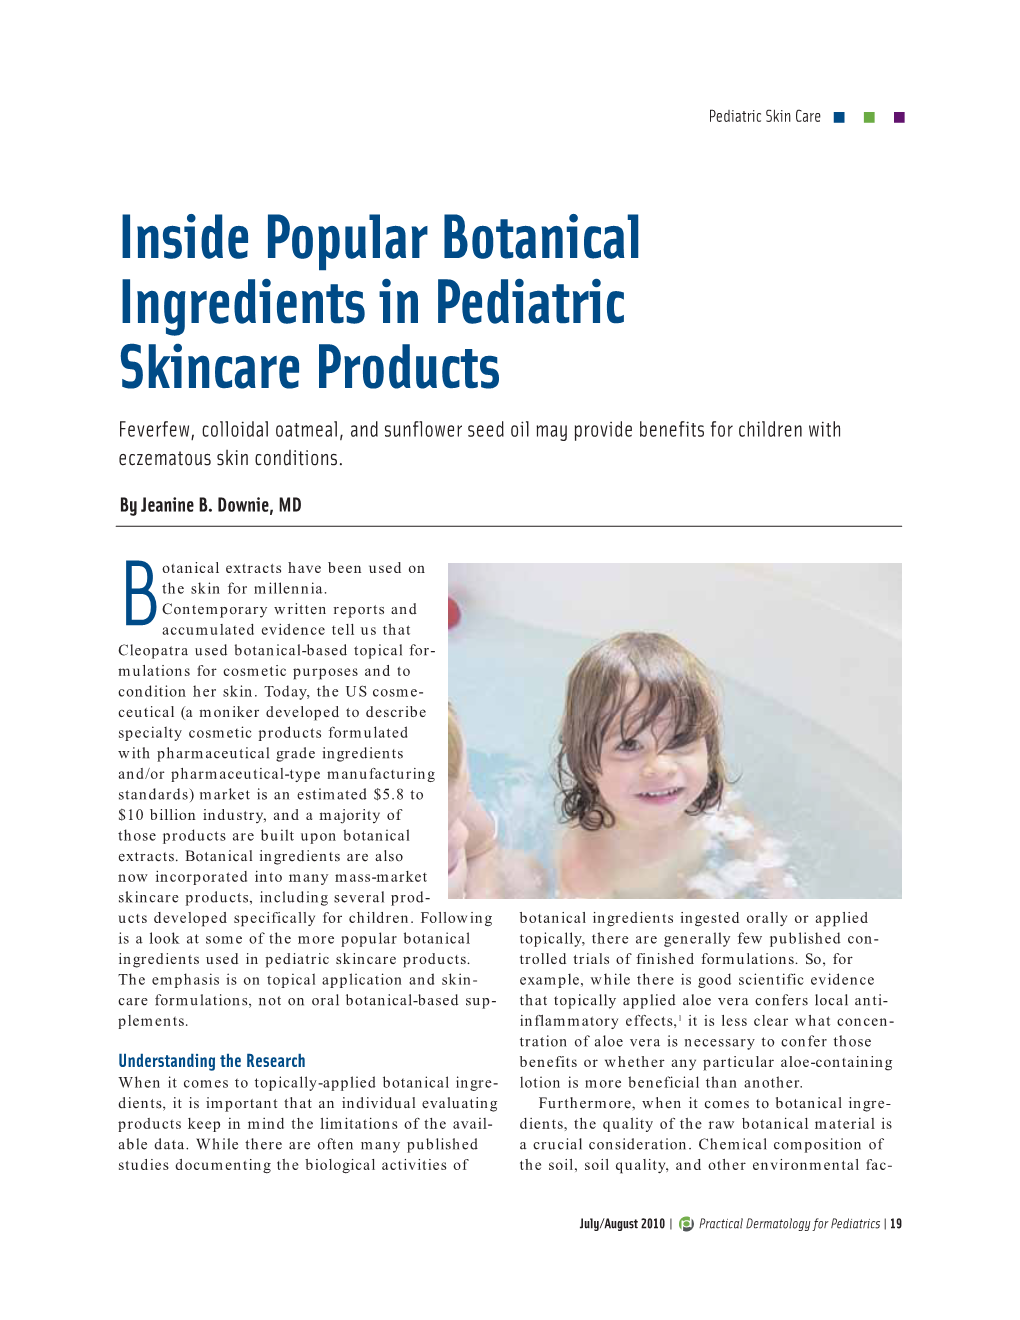 Inside Popular Botanical Ingredients in Pediatric Skincare Products